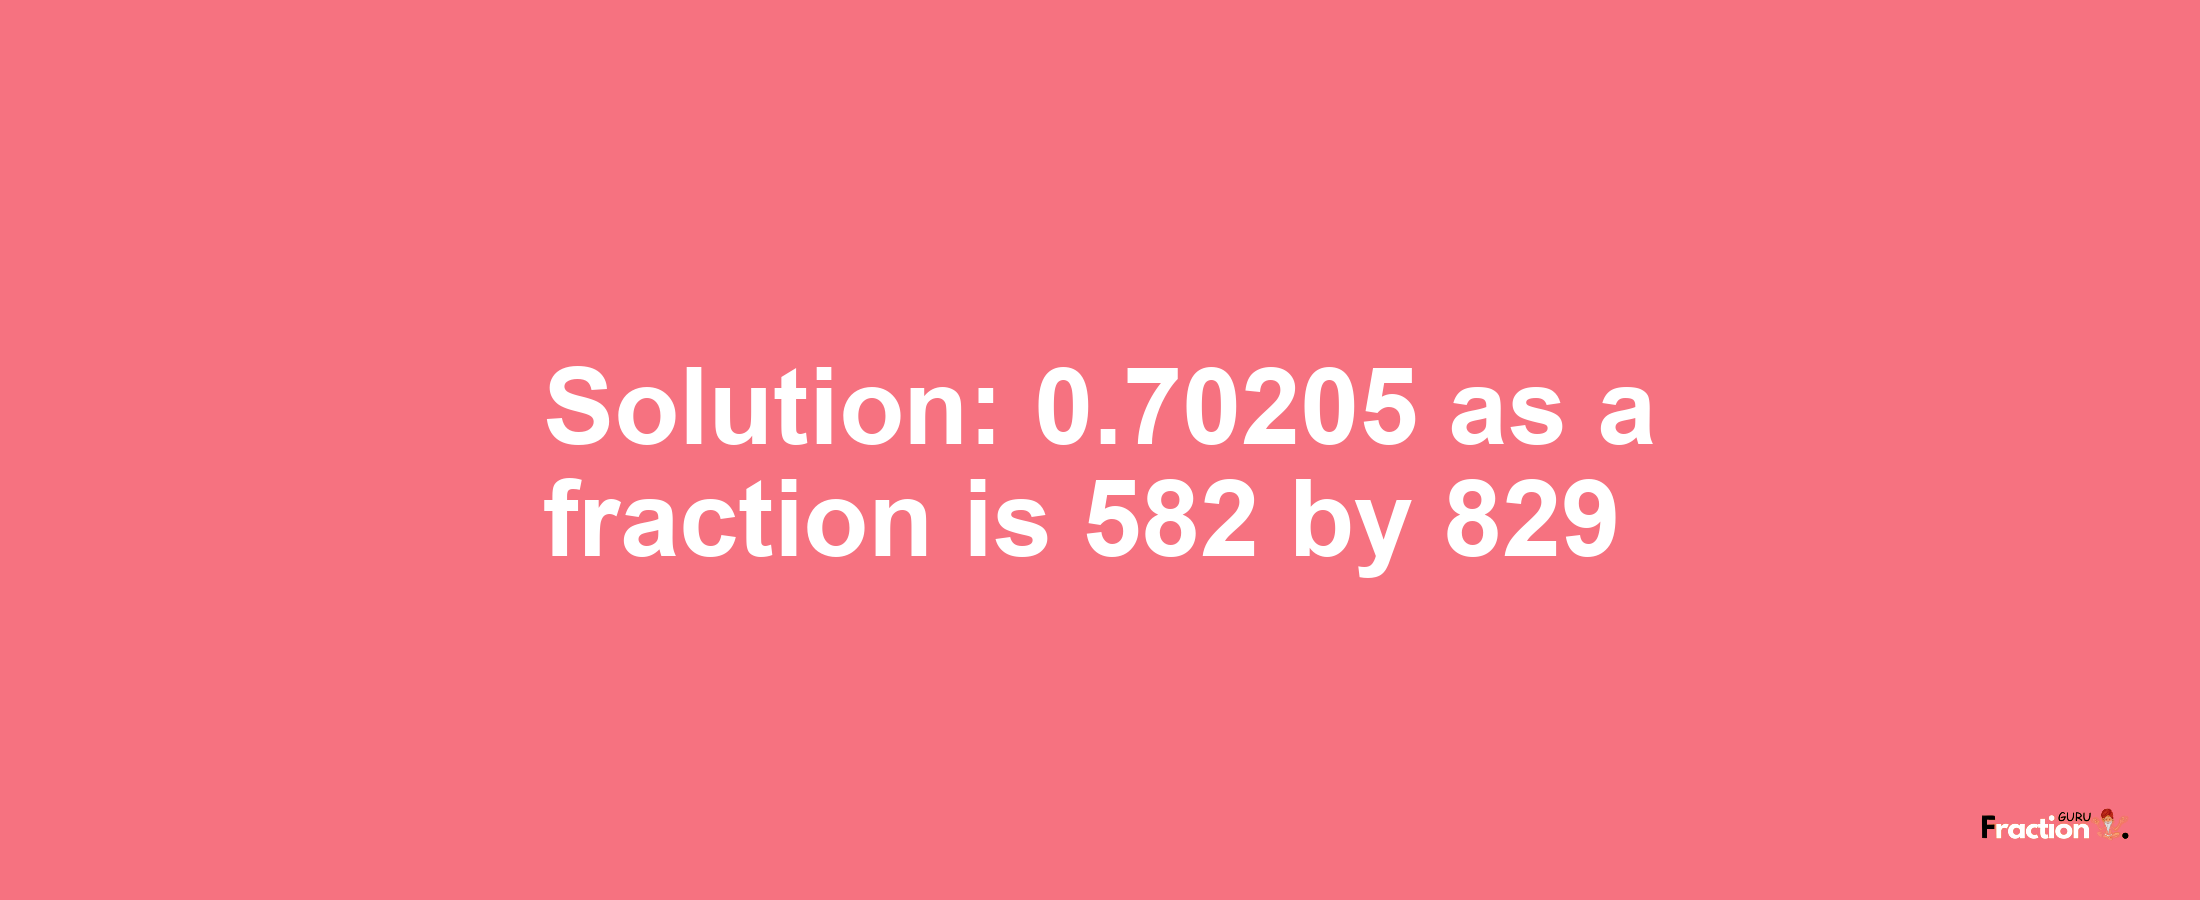 Solution:0.70205 as a fraction is 582/829